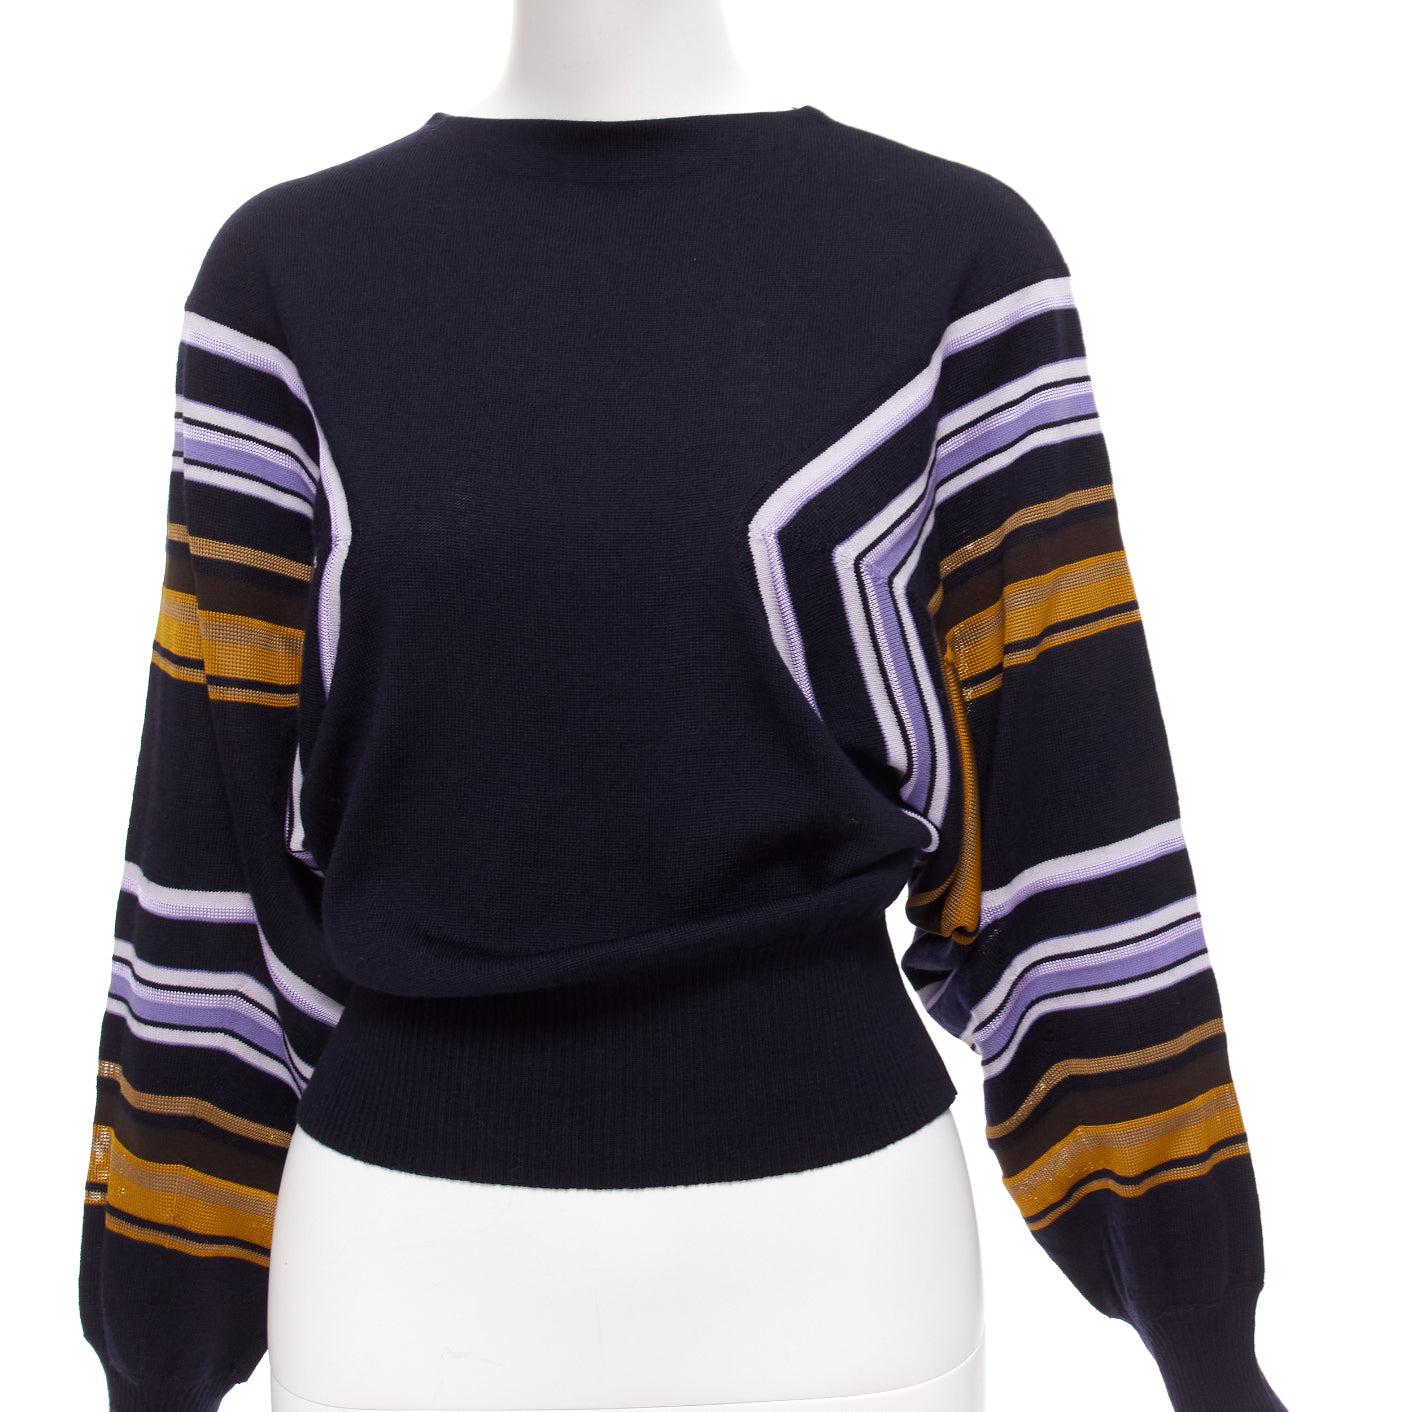 MARNI navy multicolour virgin wool blend geometric batwing sweater IT38 XS
Reference: CELG/A00338
Brand: Marni
Material: Virgin Wool, Blend
Color: Navy, Multicolour
Pattern: Striped
Closure: Slip On
Made in: Italy

CONDITION:
Condition: Excellent,